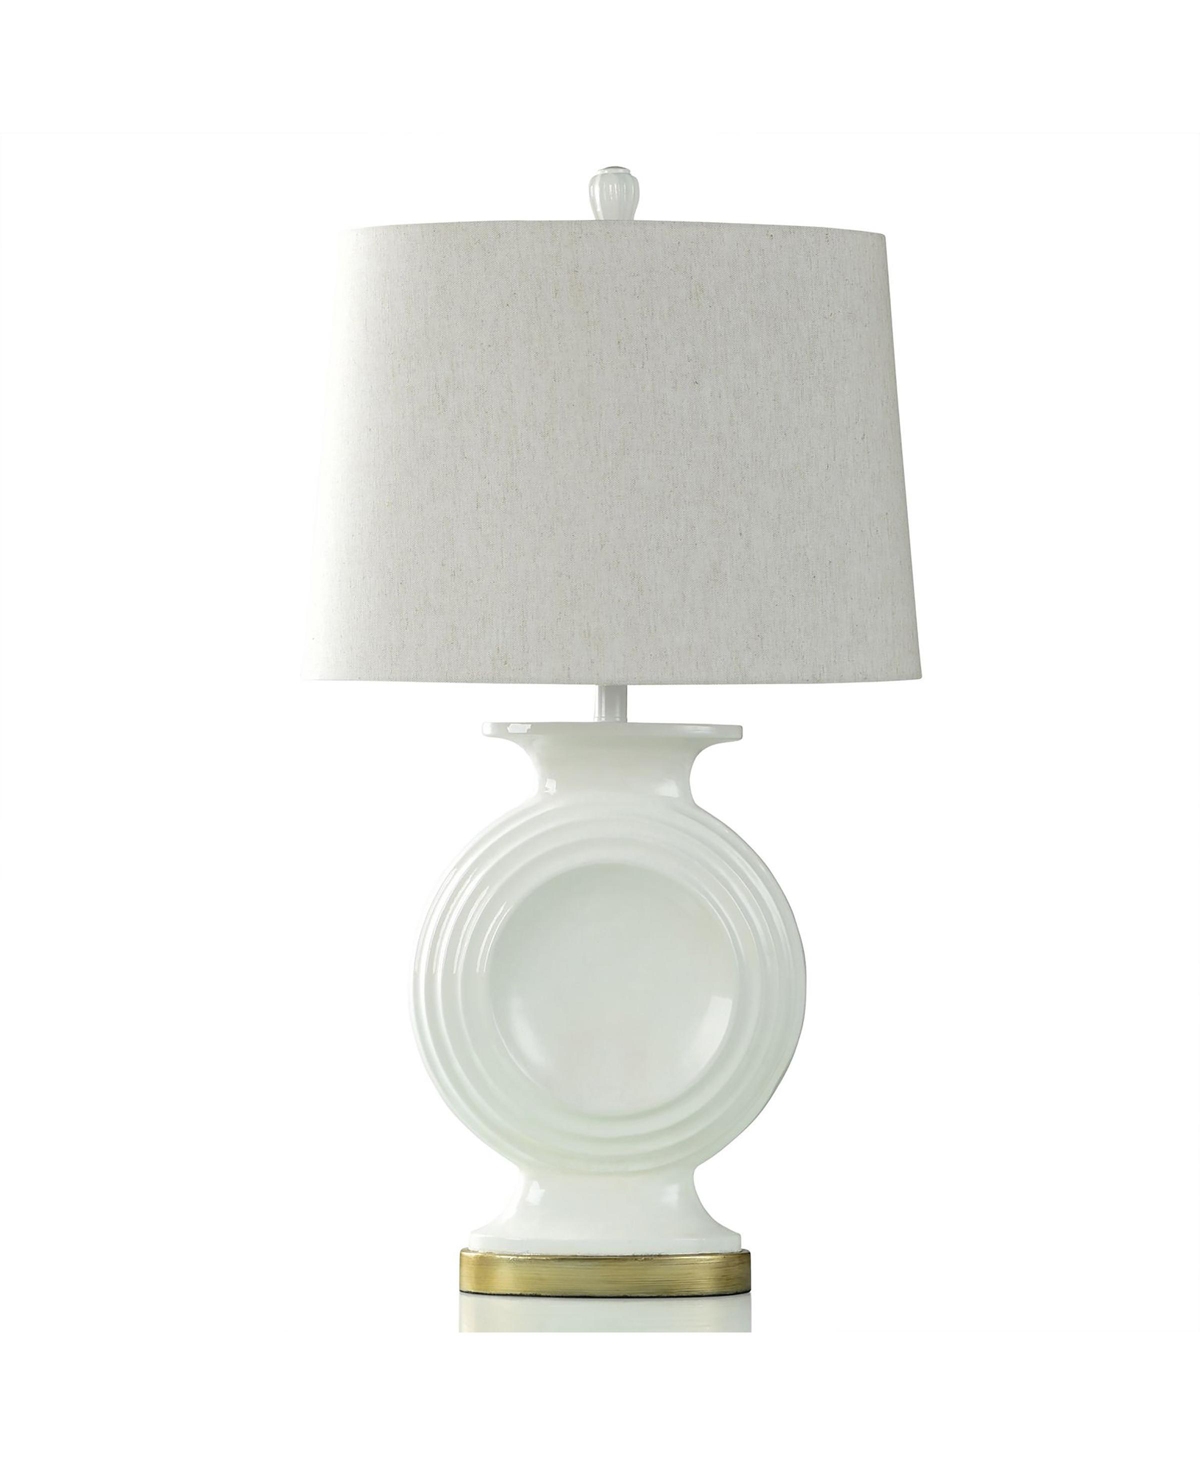 Stylecraft Home Collection 34" Norford Painted Table Lamp In White And Gold,rippled